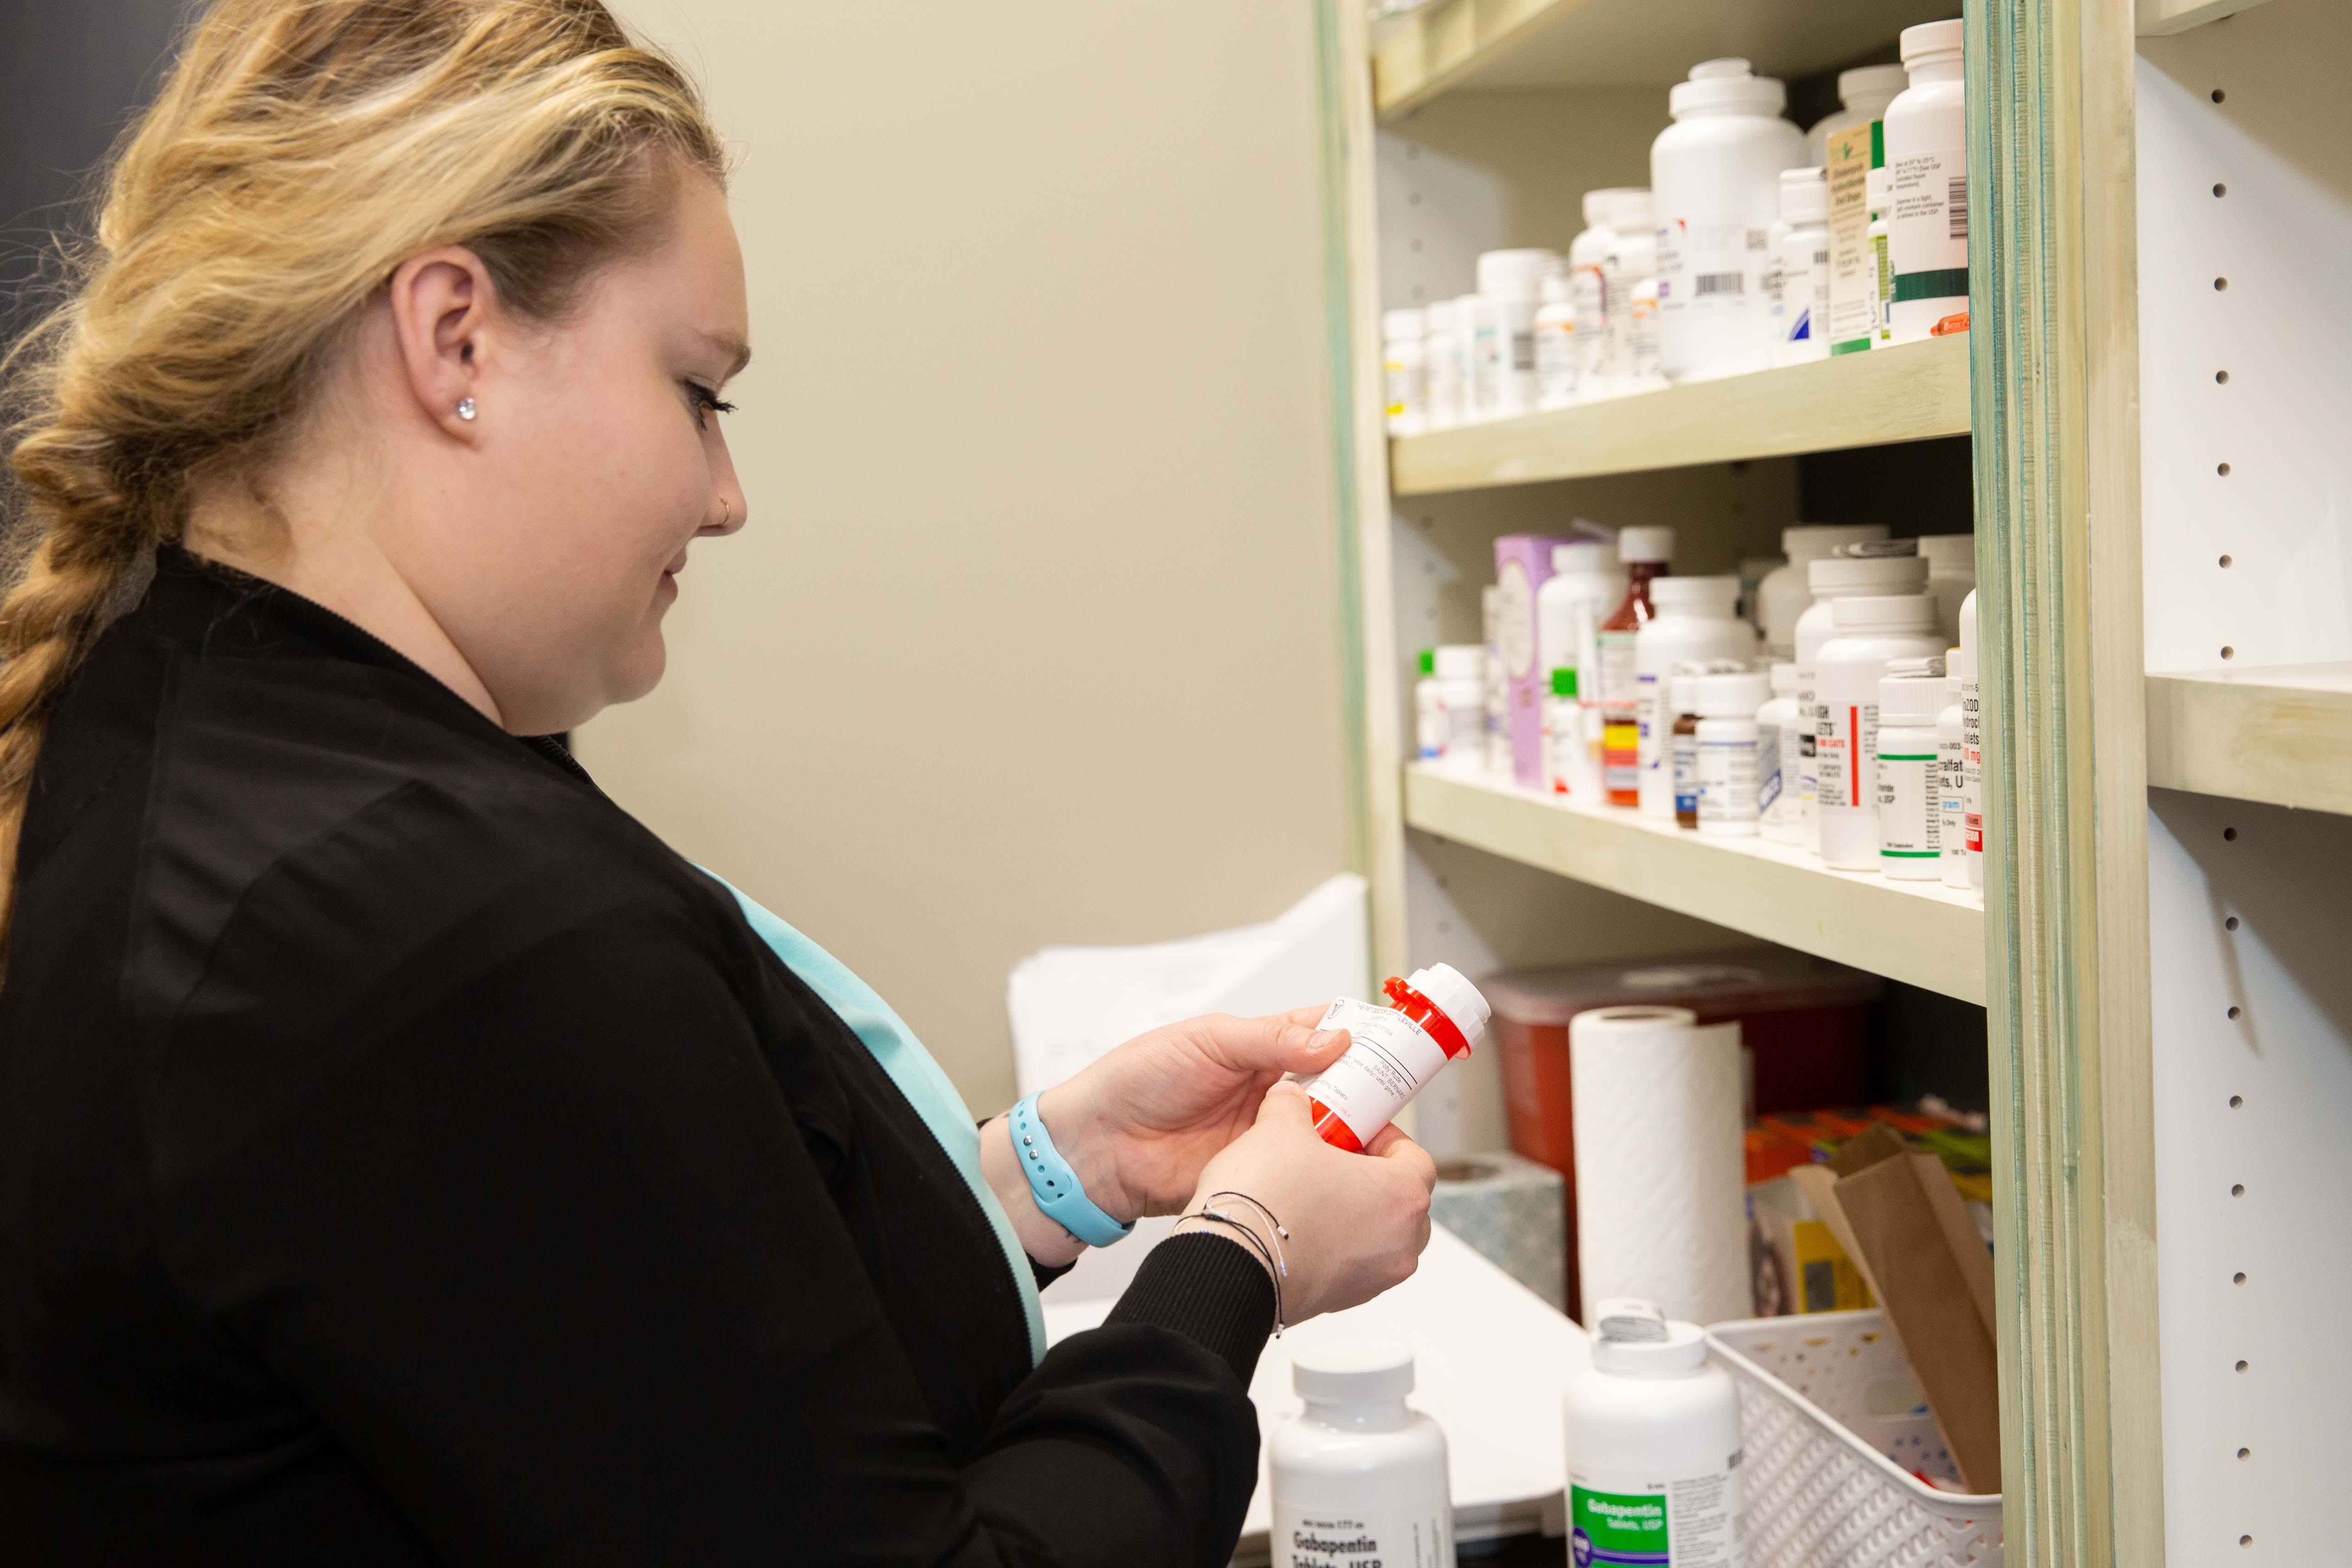 One of our wonderful team members carefully fills medication for a patient.